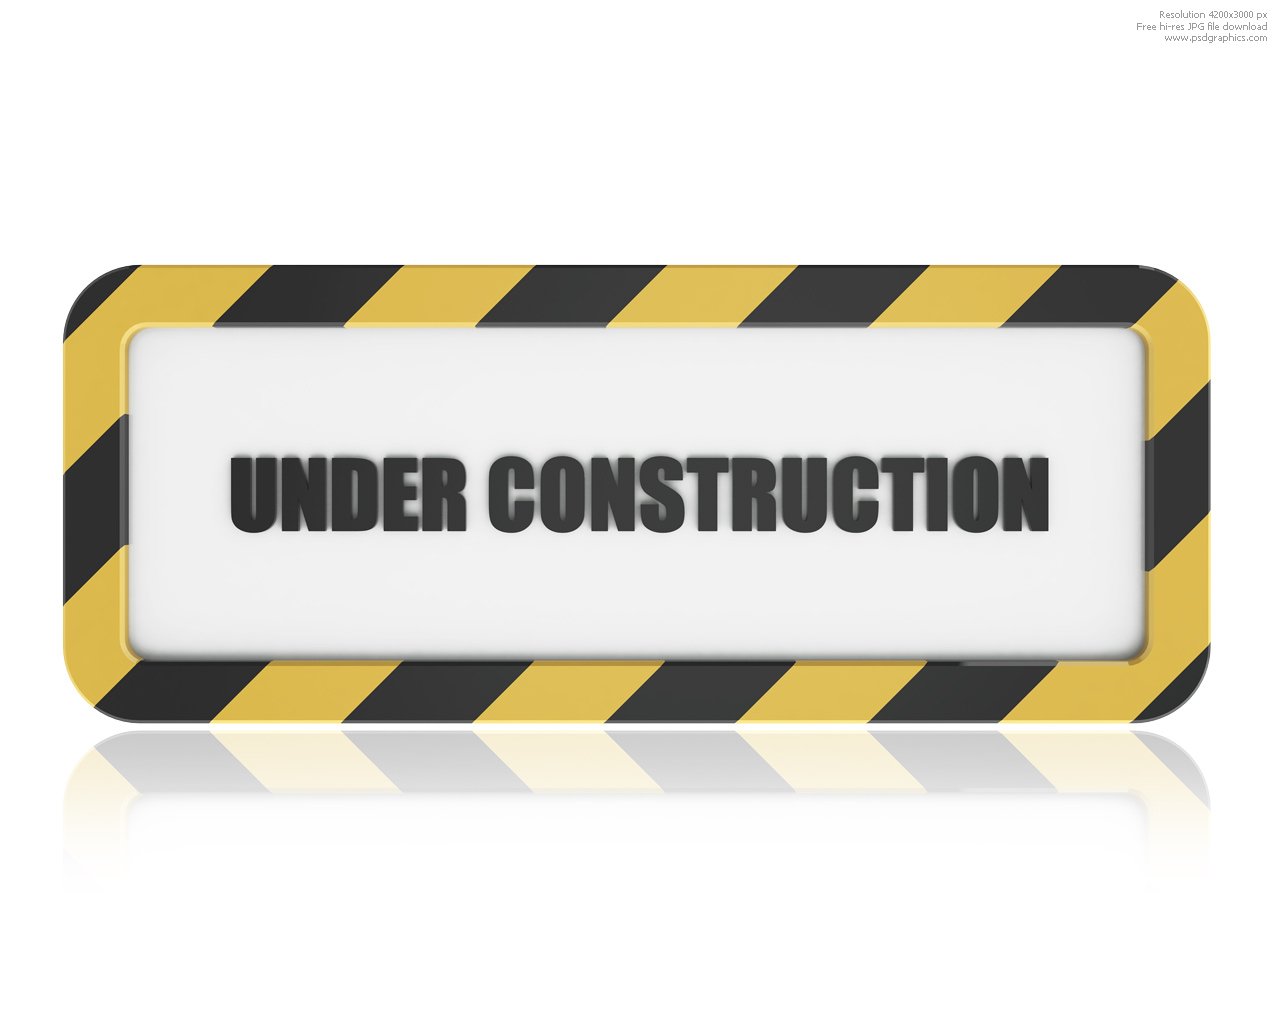 free clipart images under construction - photo #28